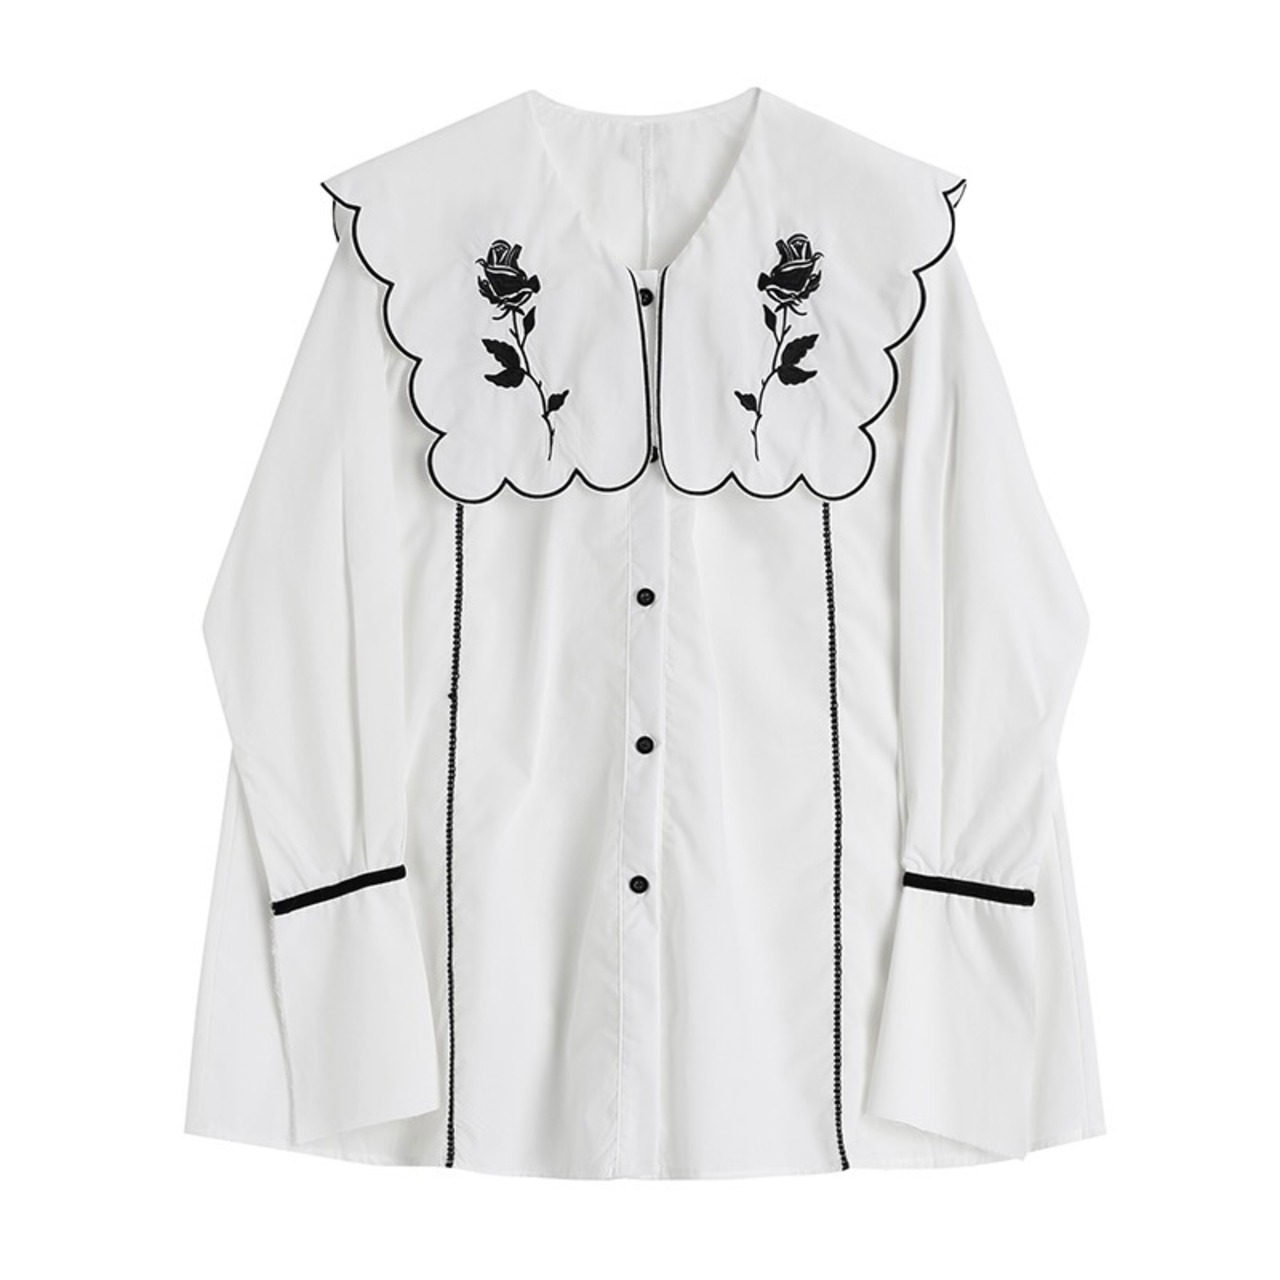 Rose embroidery white shirt